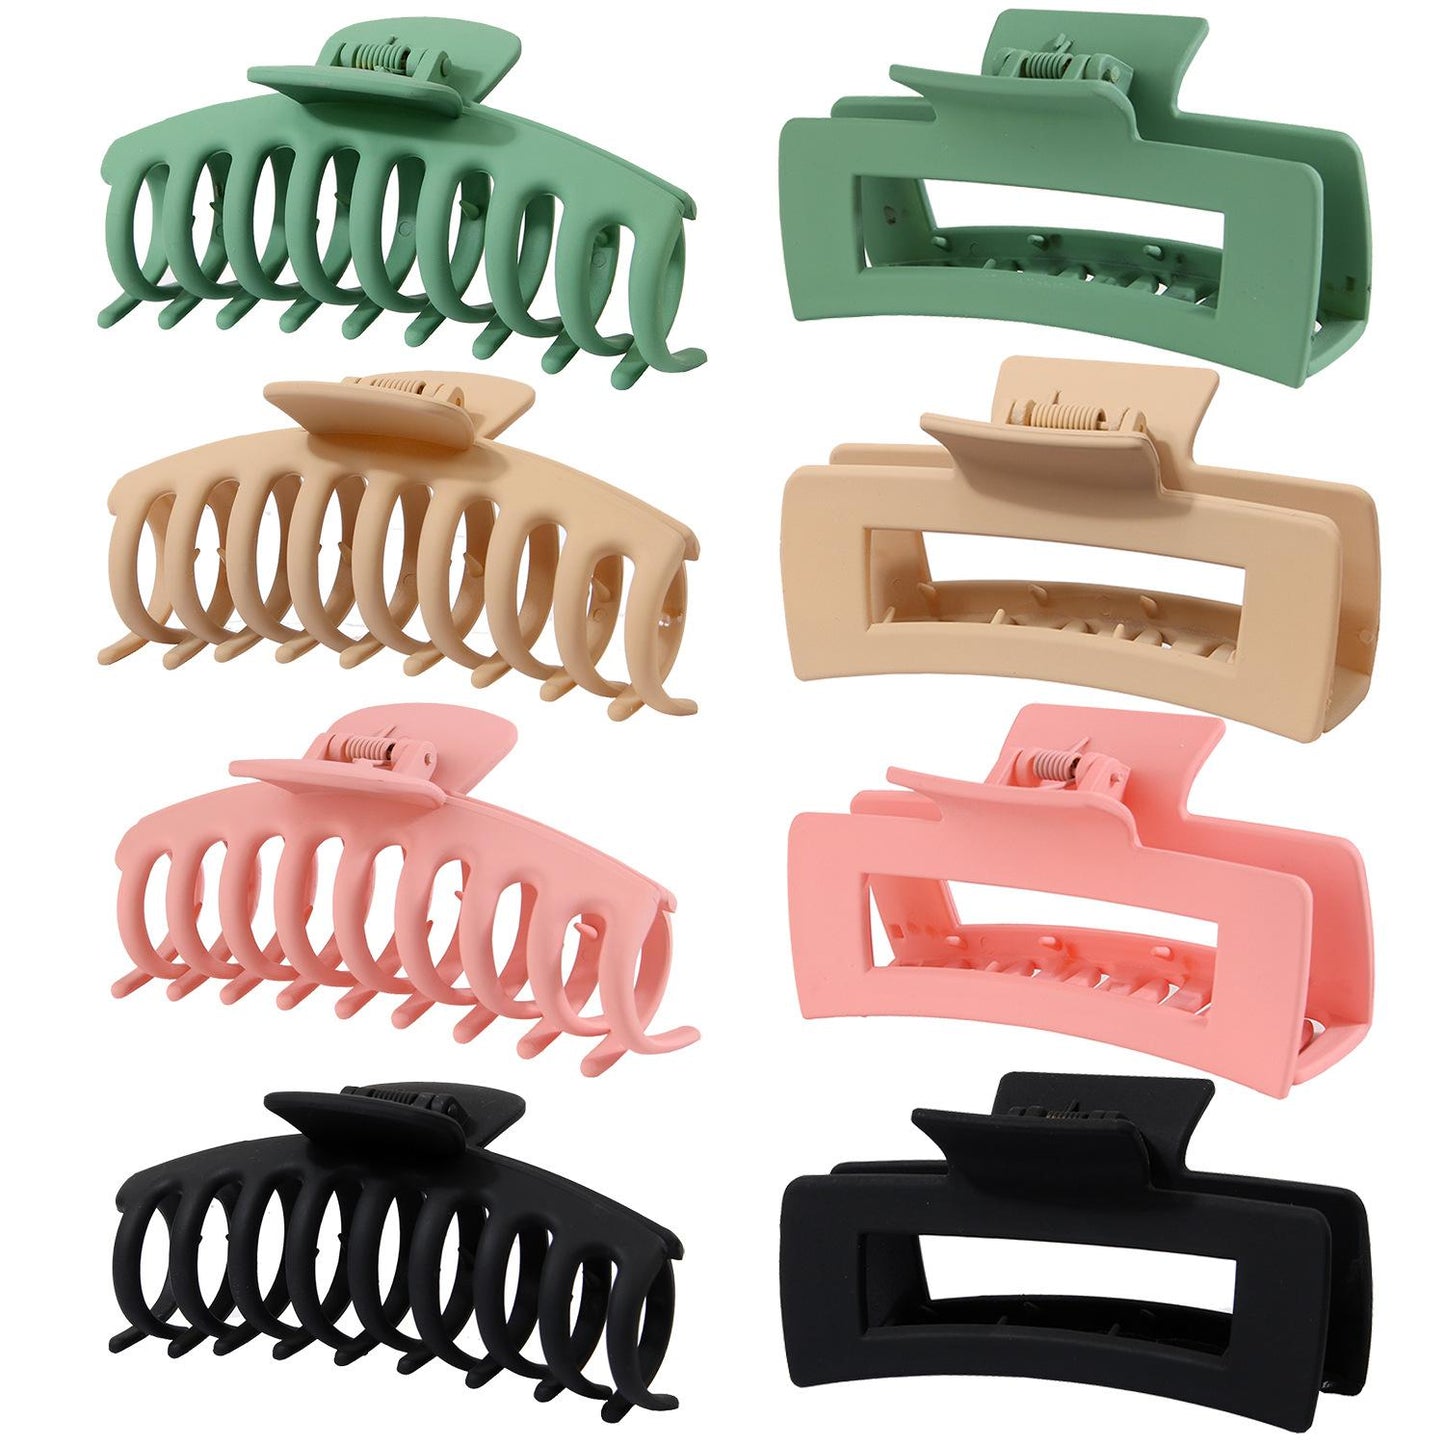 New Fashion Hair Clips for Women 4.3 Inch Large Hair Claw Clips for Women Thin Thick Curly Hair, Big Matte Banana Clips,Strong Hold jaw clips,Neutral Colors